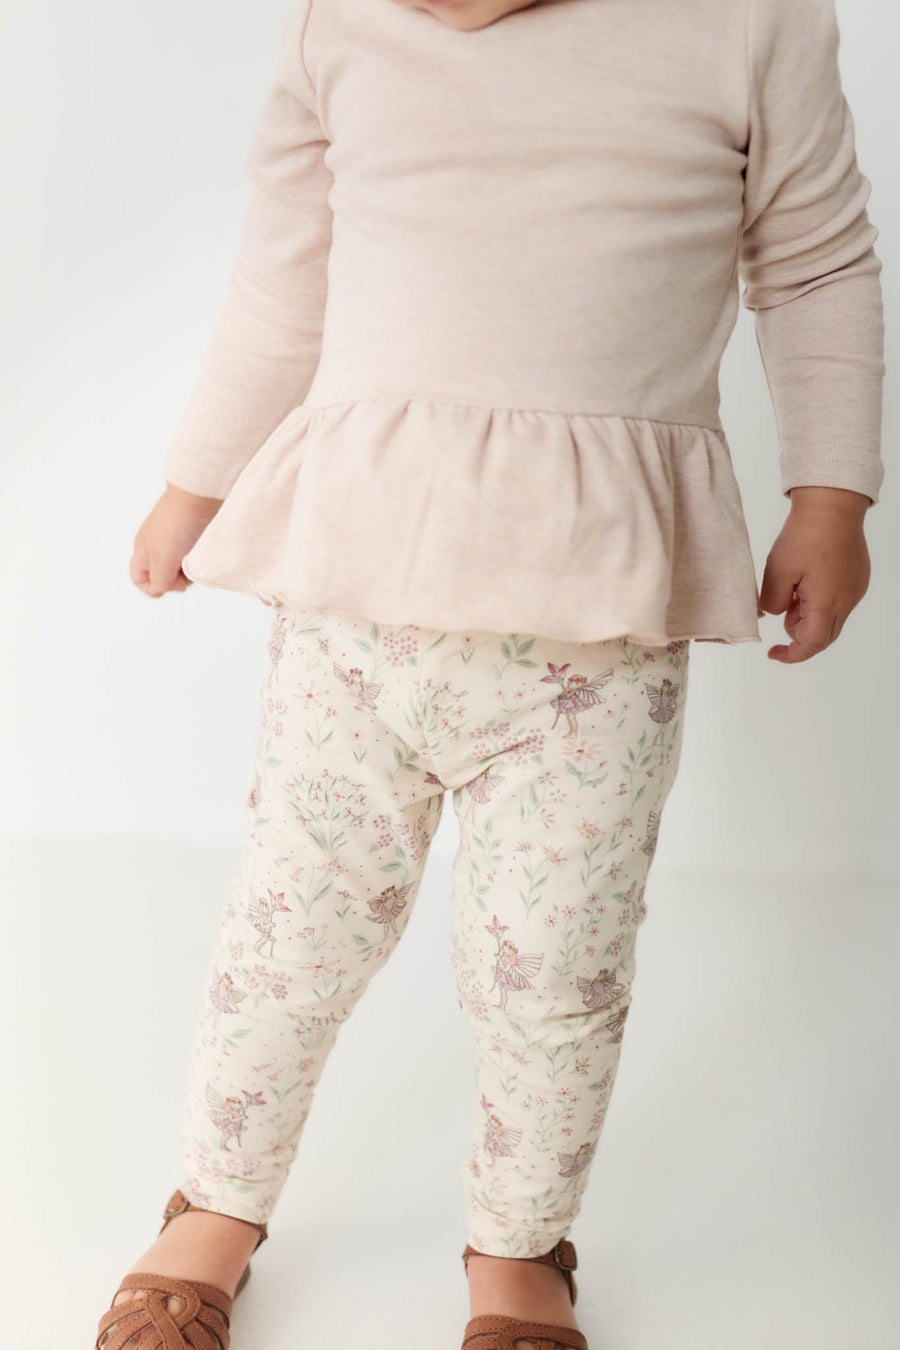 Pima Cotton Bailey Top - Luna Marle Childrens Top from Jamie Kay NZ